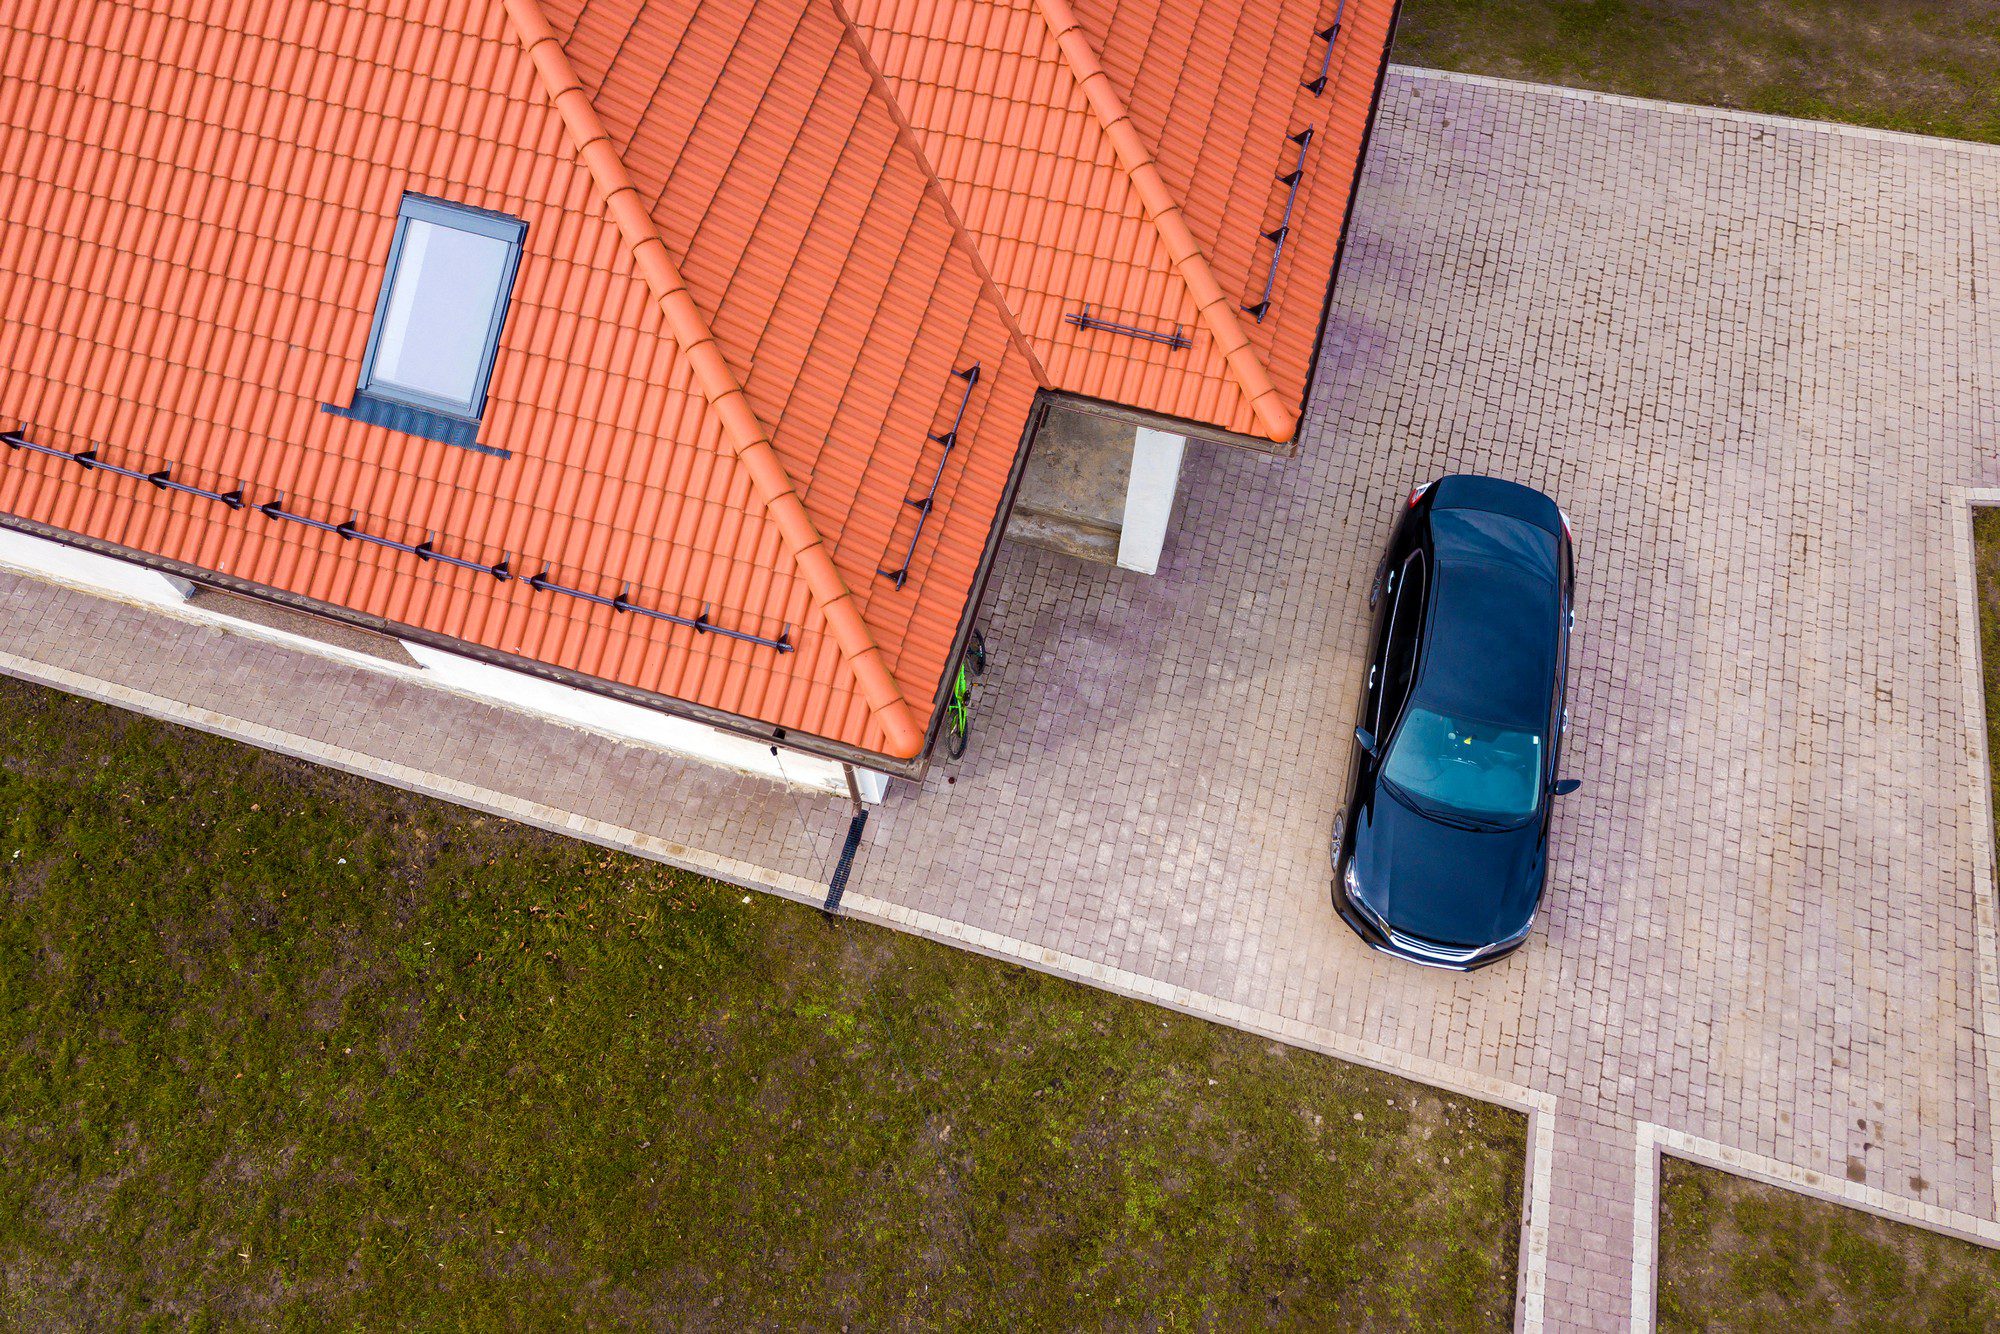 This image shows a top-down aerial view of a residential area. In the centre of the frame, there's a dark-coloured car parked on a brick-paved driveway next to a house. The roof of the house is covered with orange tiles and has a single window visible. To the left of the house, there's a grassy area with a light green garden hose coiled up near the wall. The layout appears very neat and orderly, with the driveway and adjacent pathways having a uniform brick pattern.